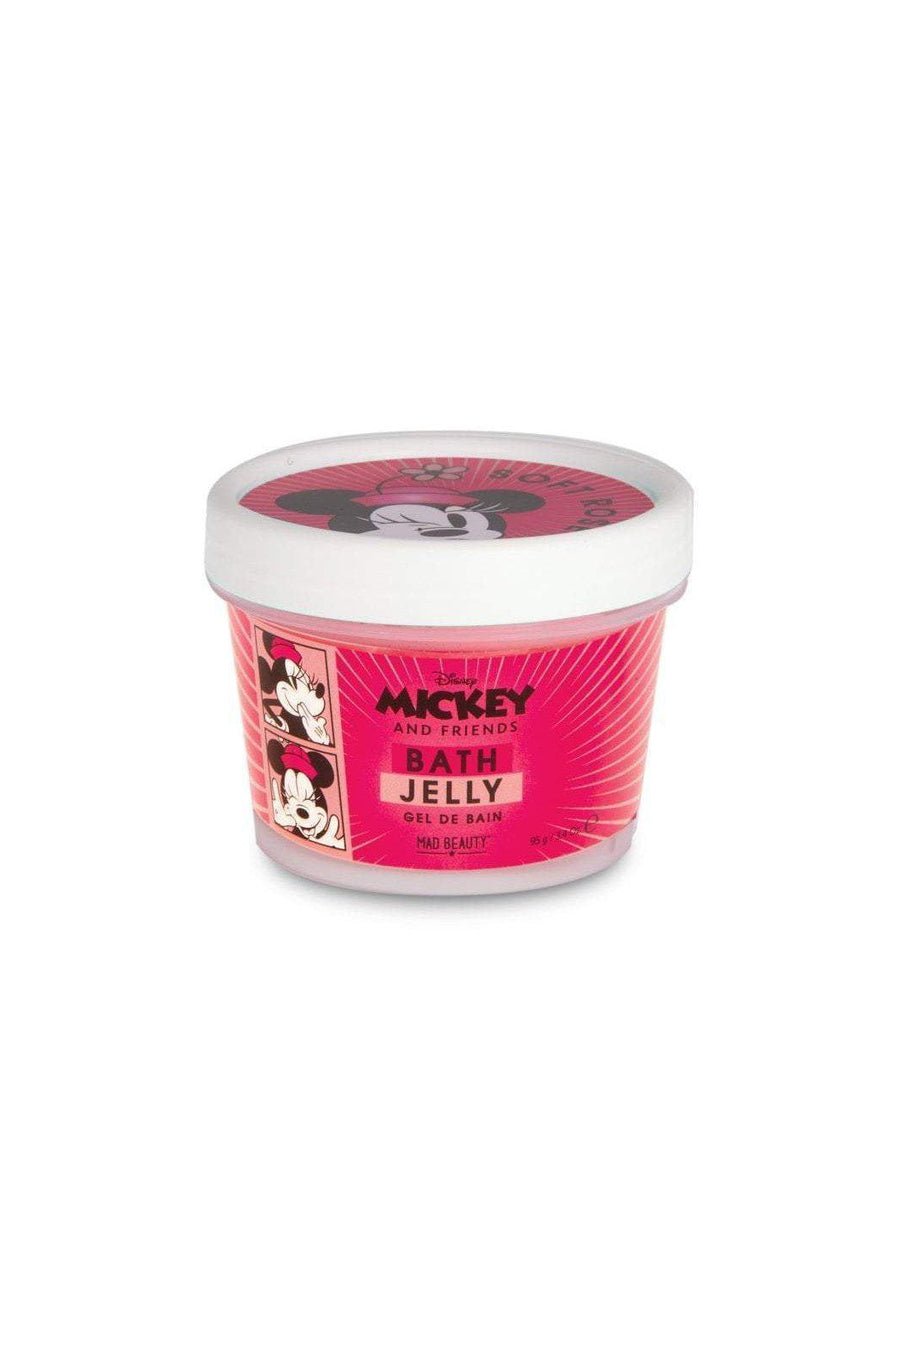 Buy Disney Mickey &amp; Friends Bath Jelly at Spoiled Brat  Online - UK online Fashion &amp; lifestyle boutique